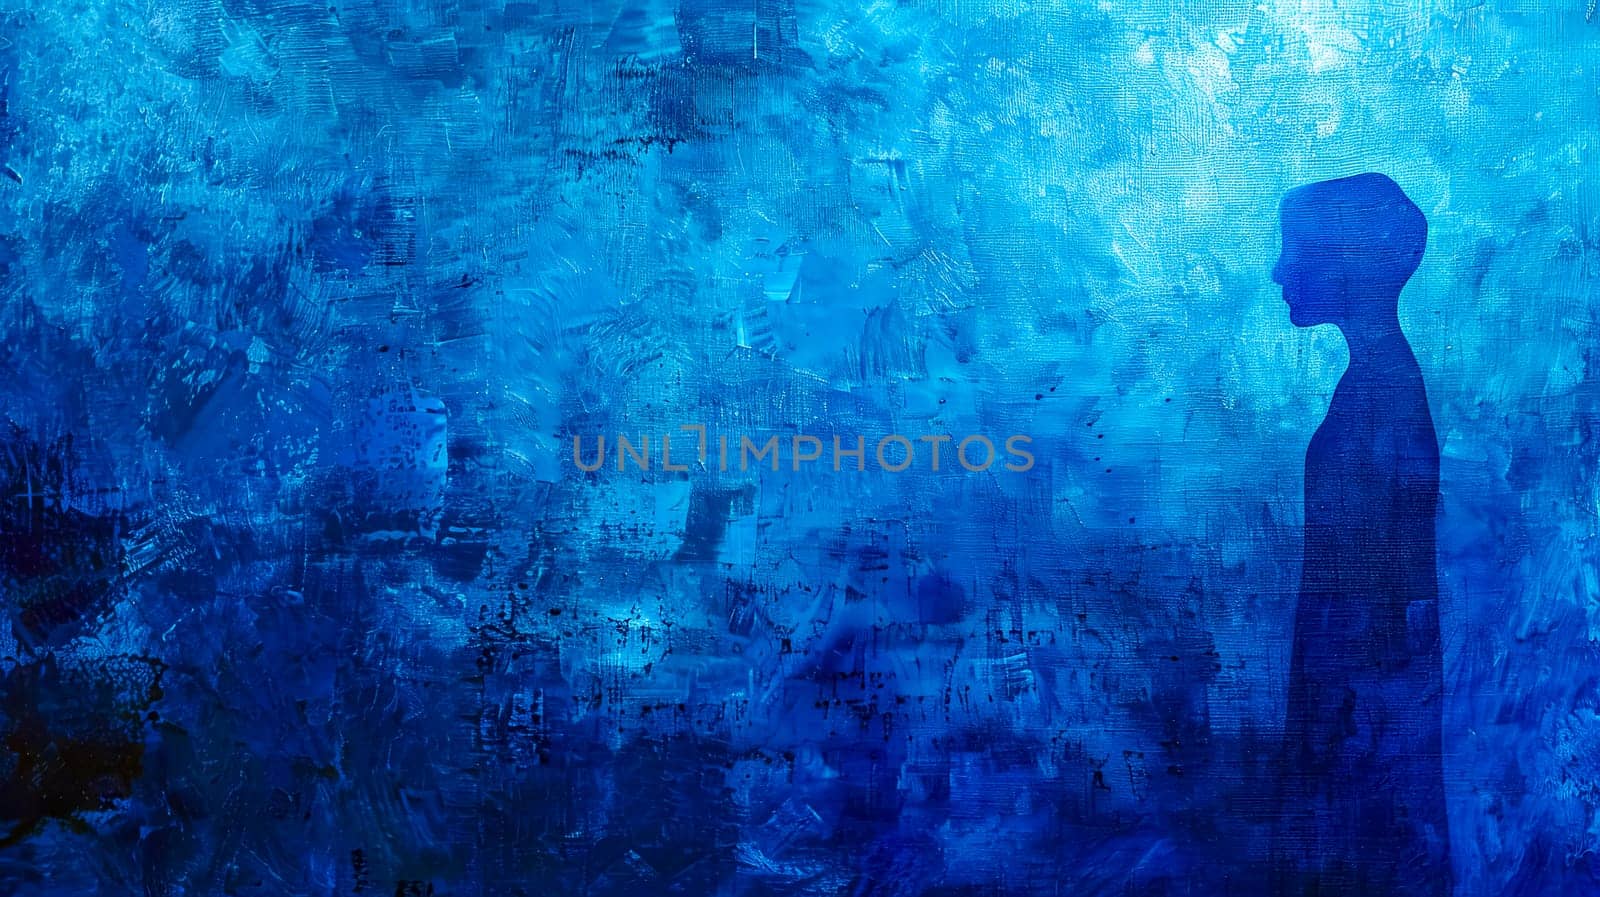 A person's silhouette stands out against a textured blue canvas